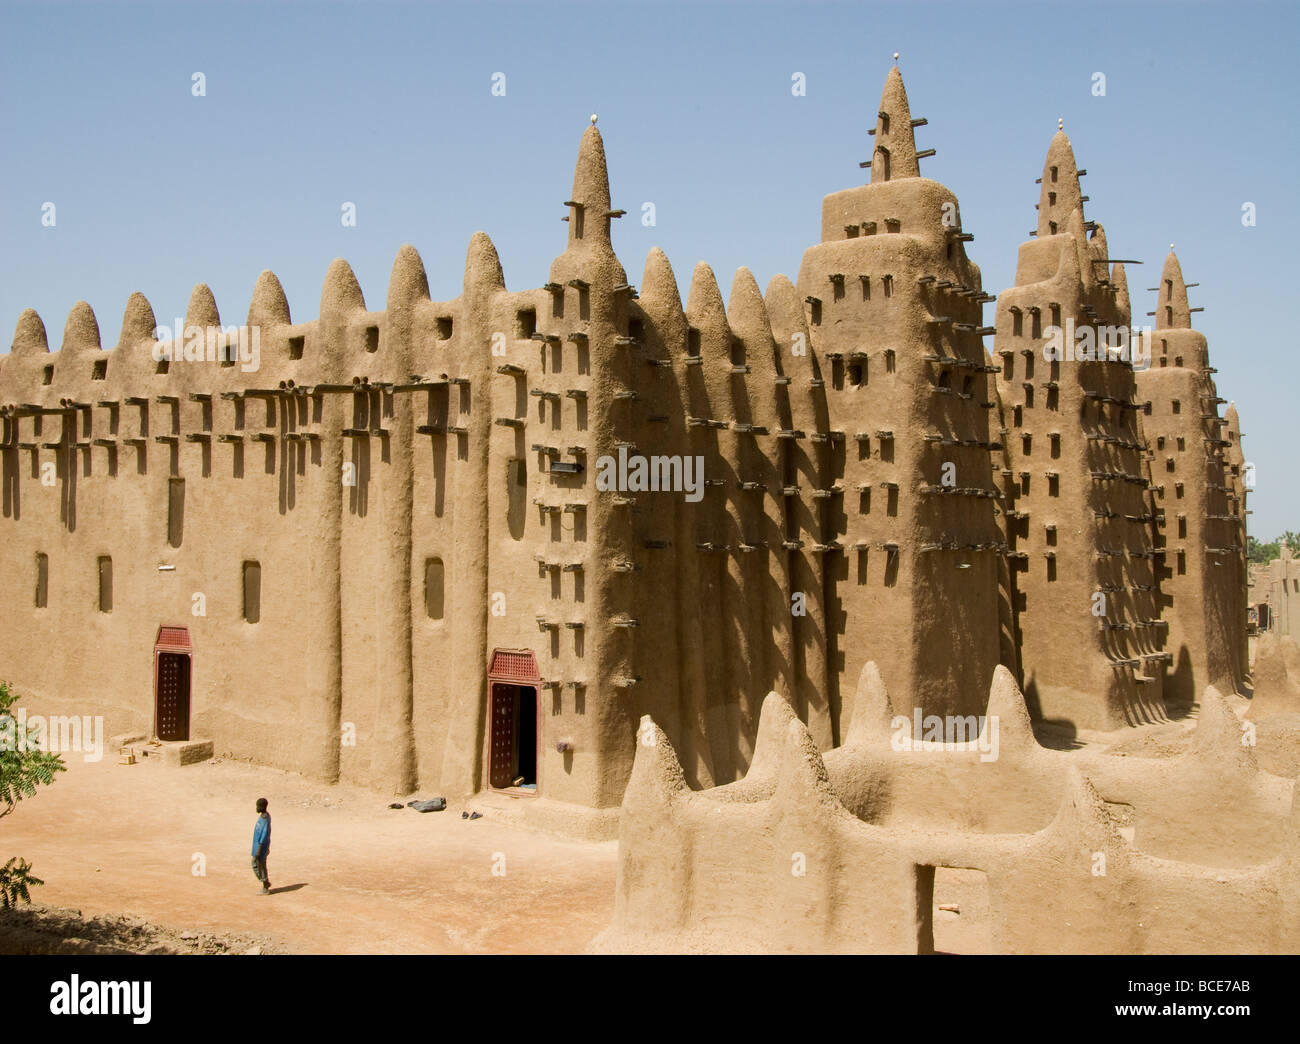 Mali. Sahel. Great mosque of Djenne(XI century). Sudanese architecture style. Built in adobe. Unesco World Heritage Site. Stock Photo